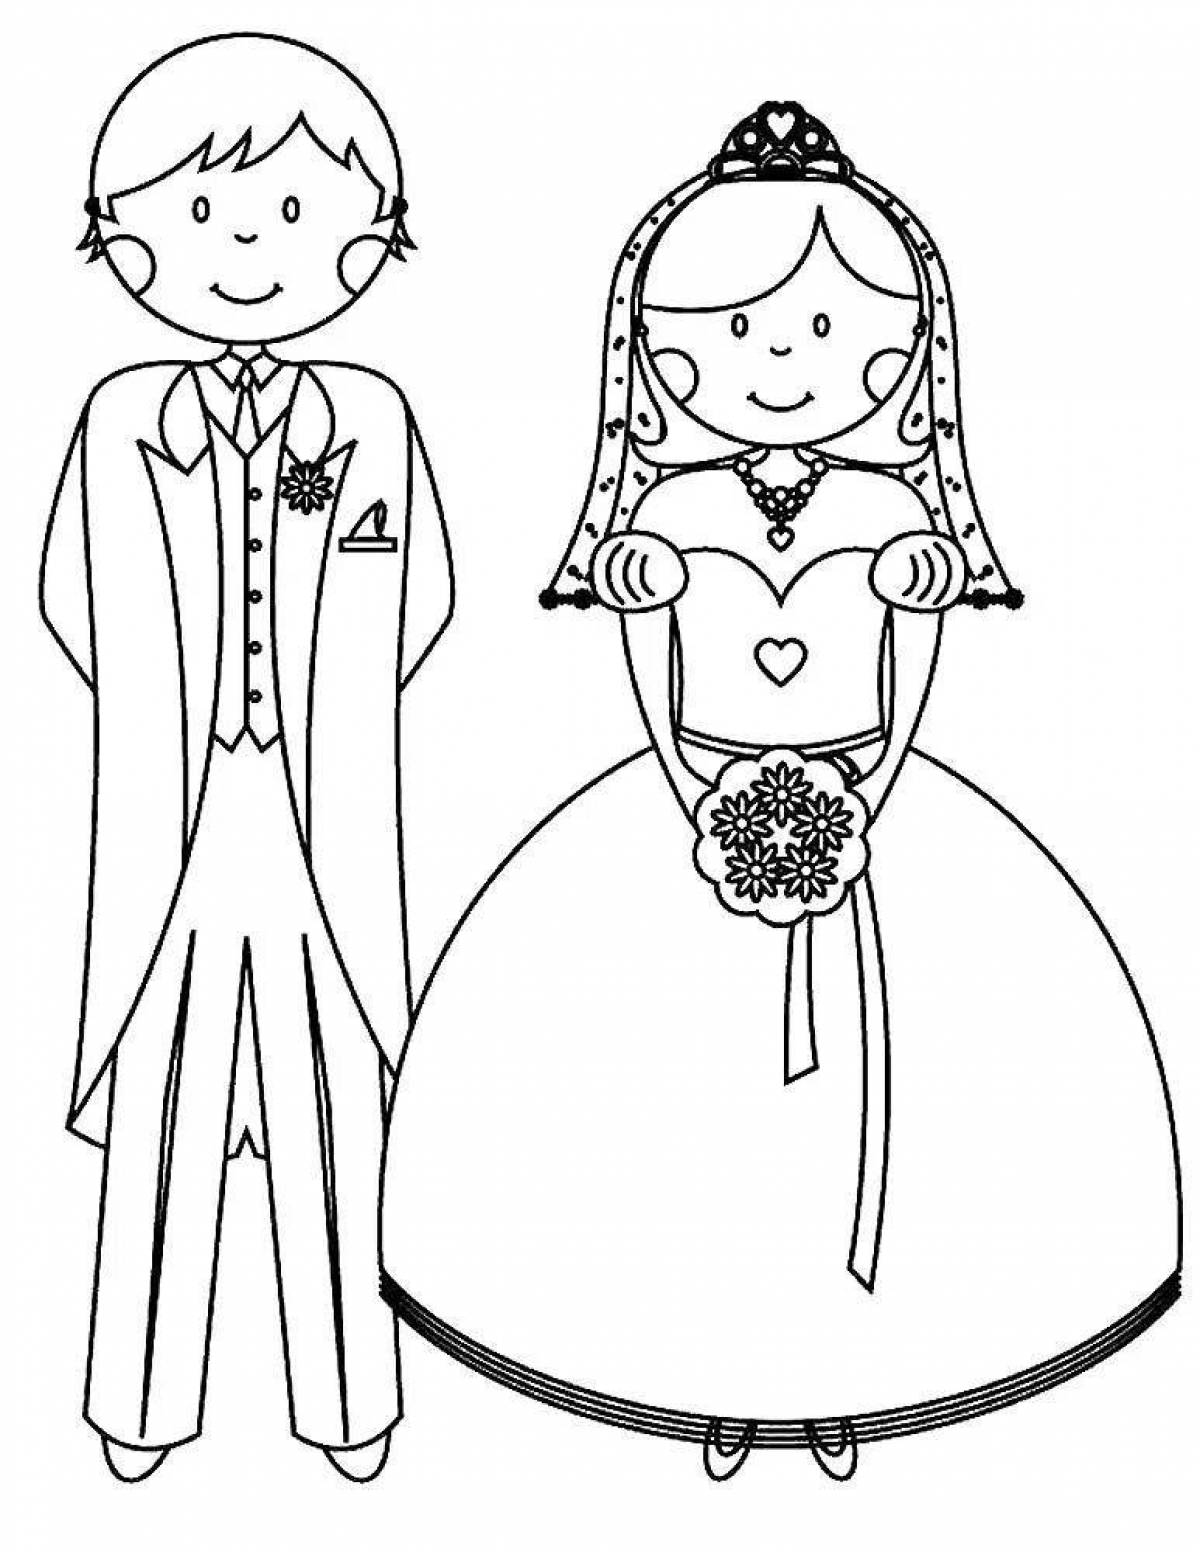 Exquisite bride and groom coloring book